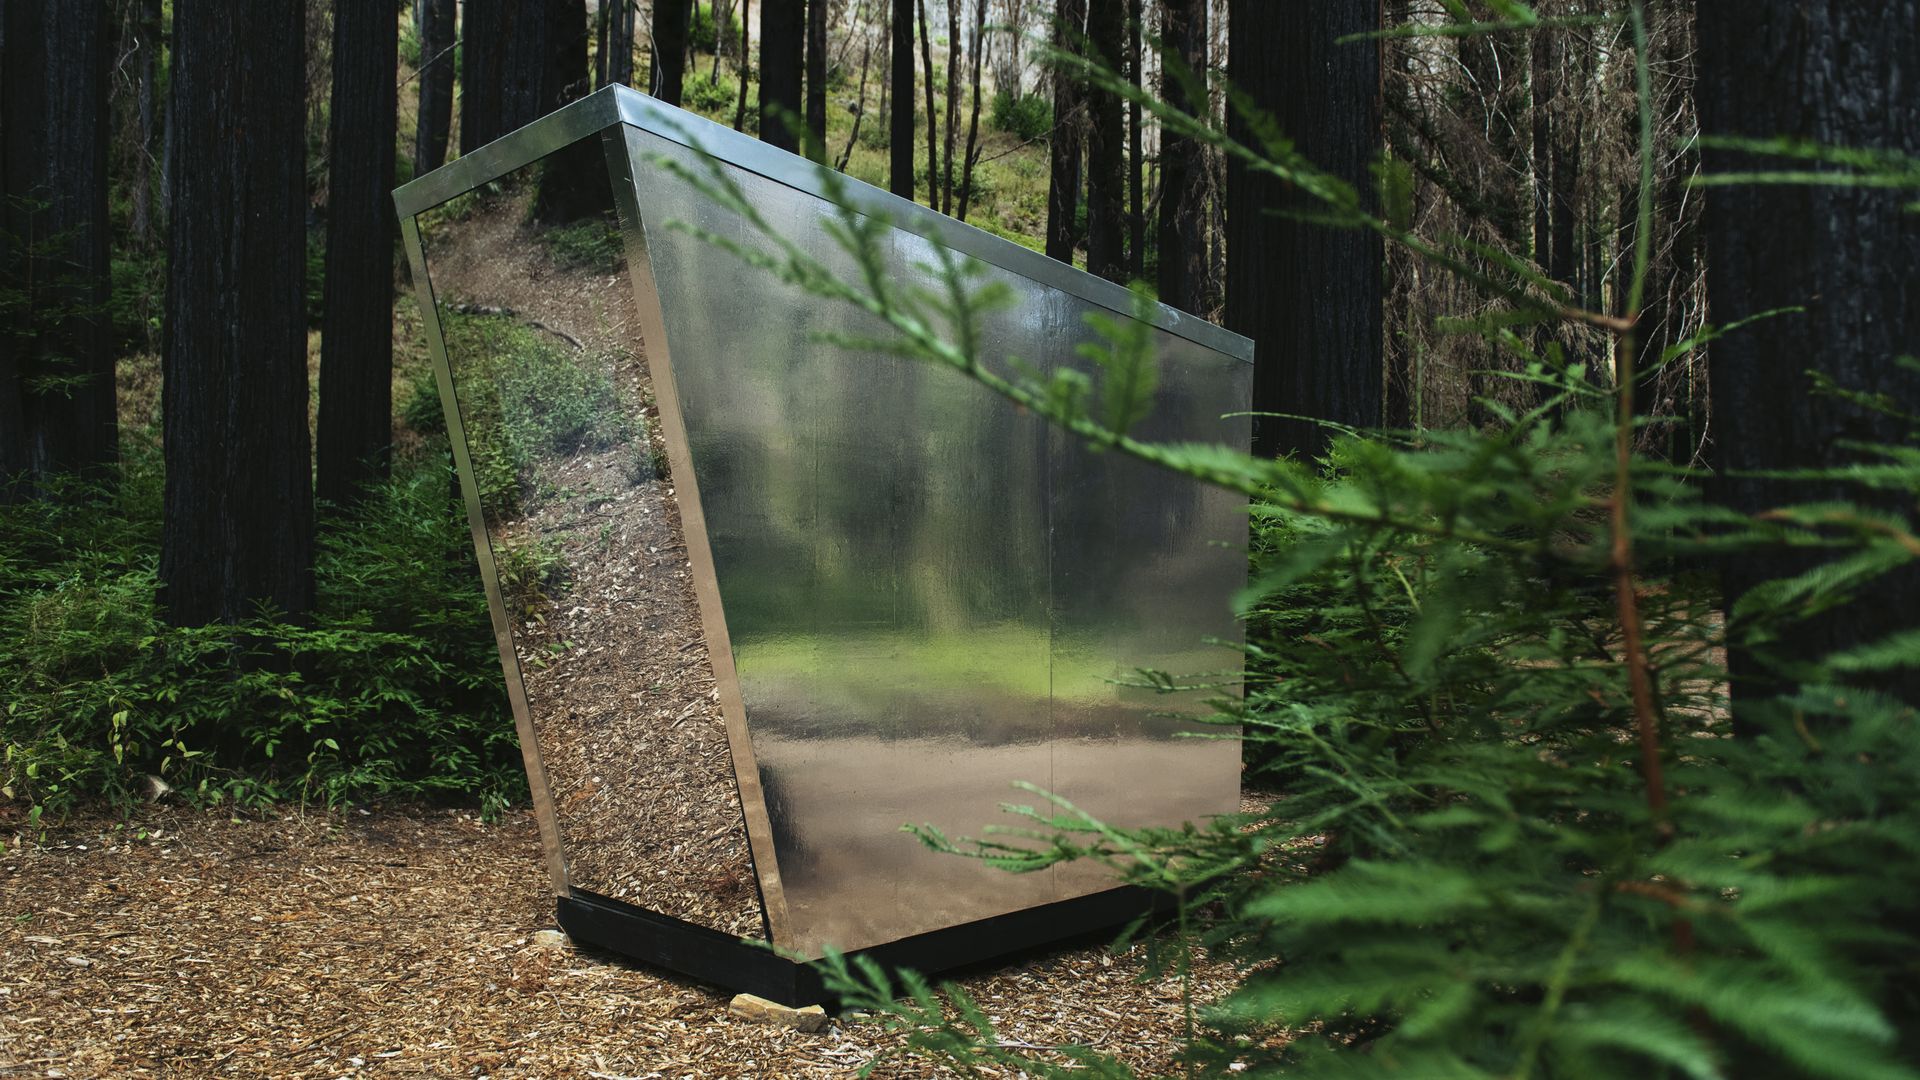 The Portal, a futuristic-looking mirrored outdoor toilet, sitting in a forested area.